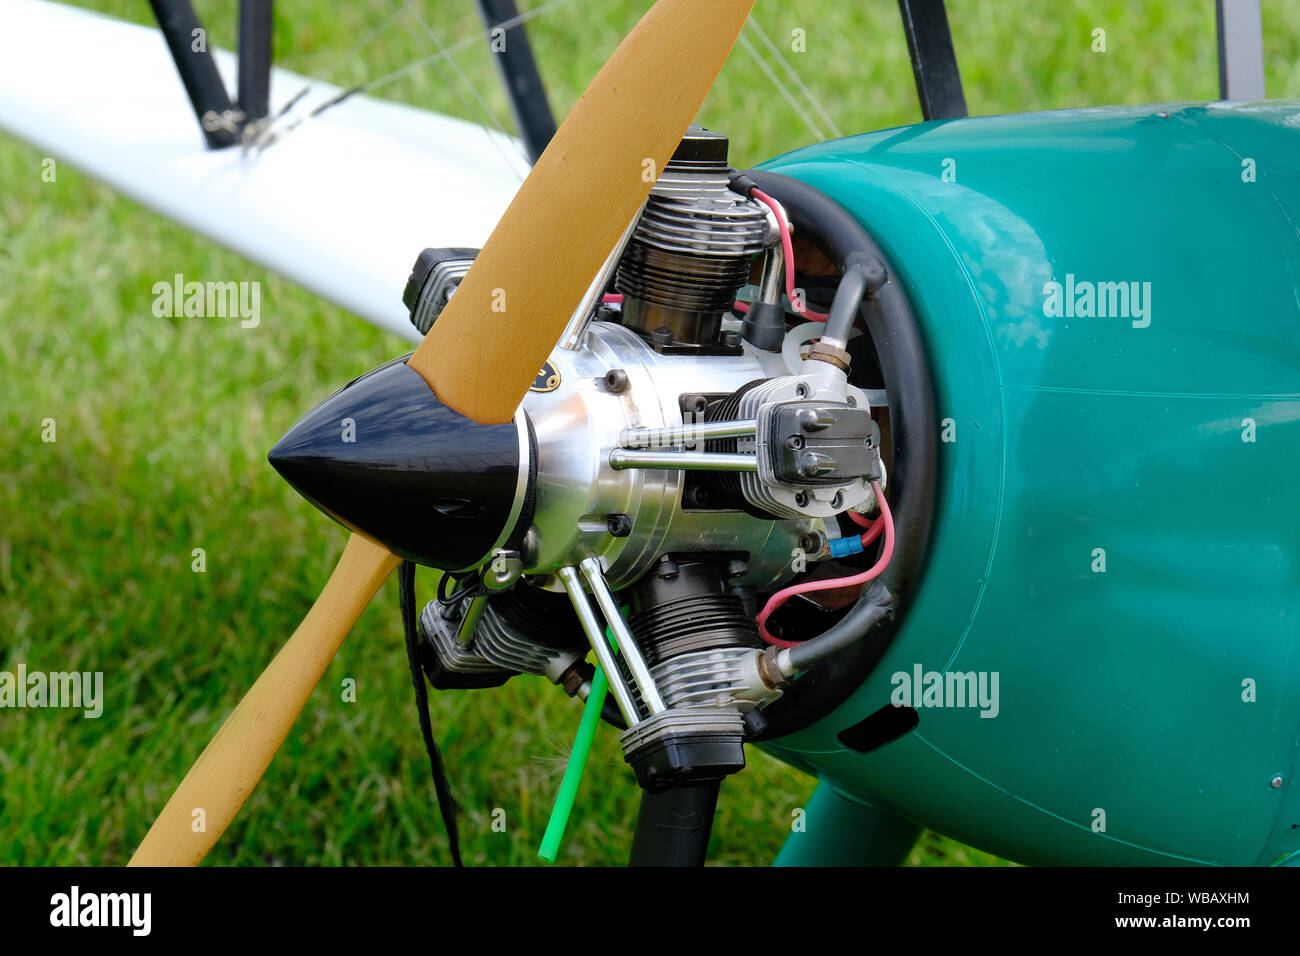 Model radio control airc4raft engine and propeller. Stock Photo